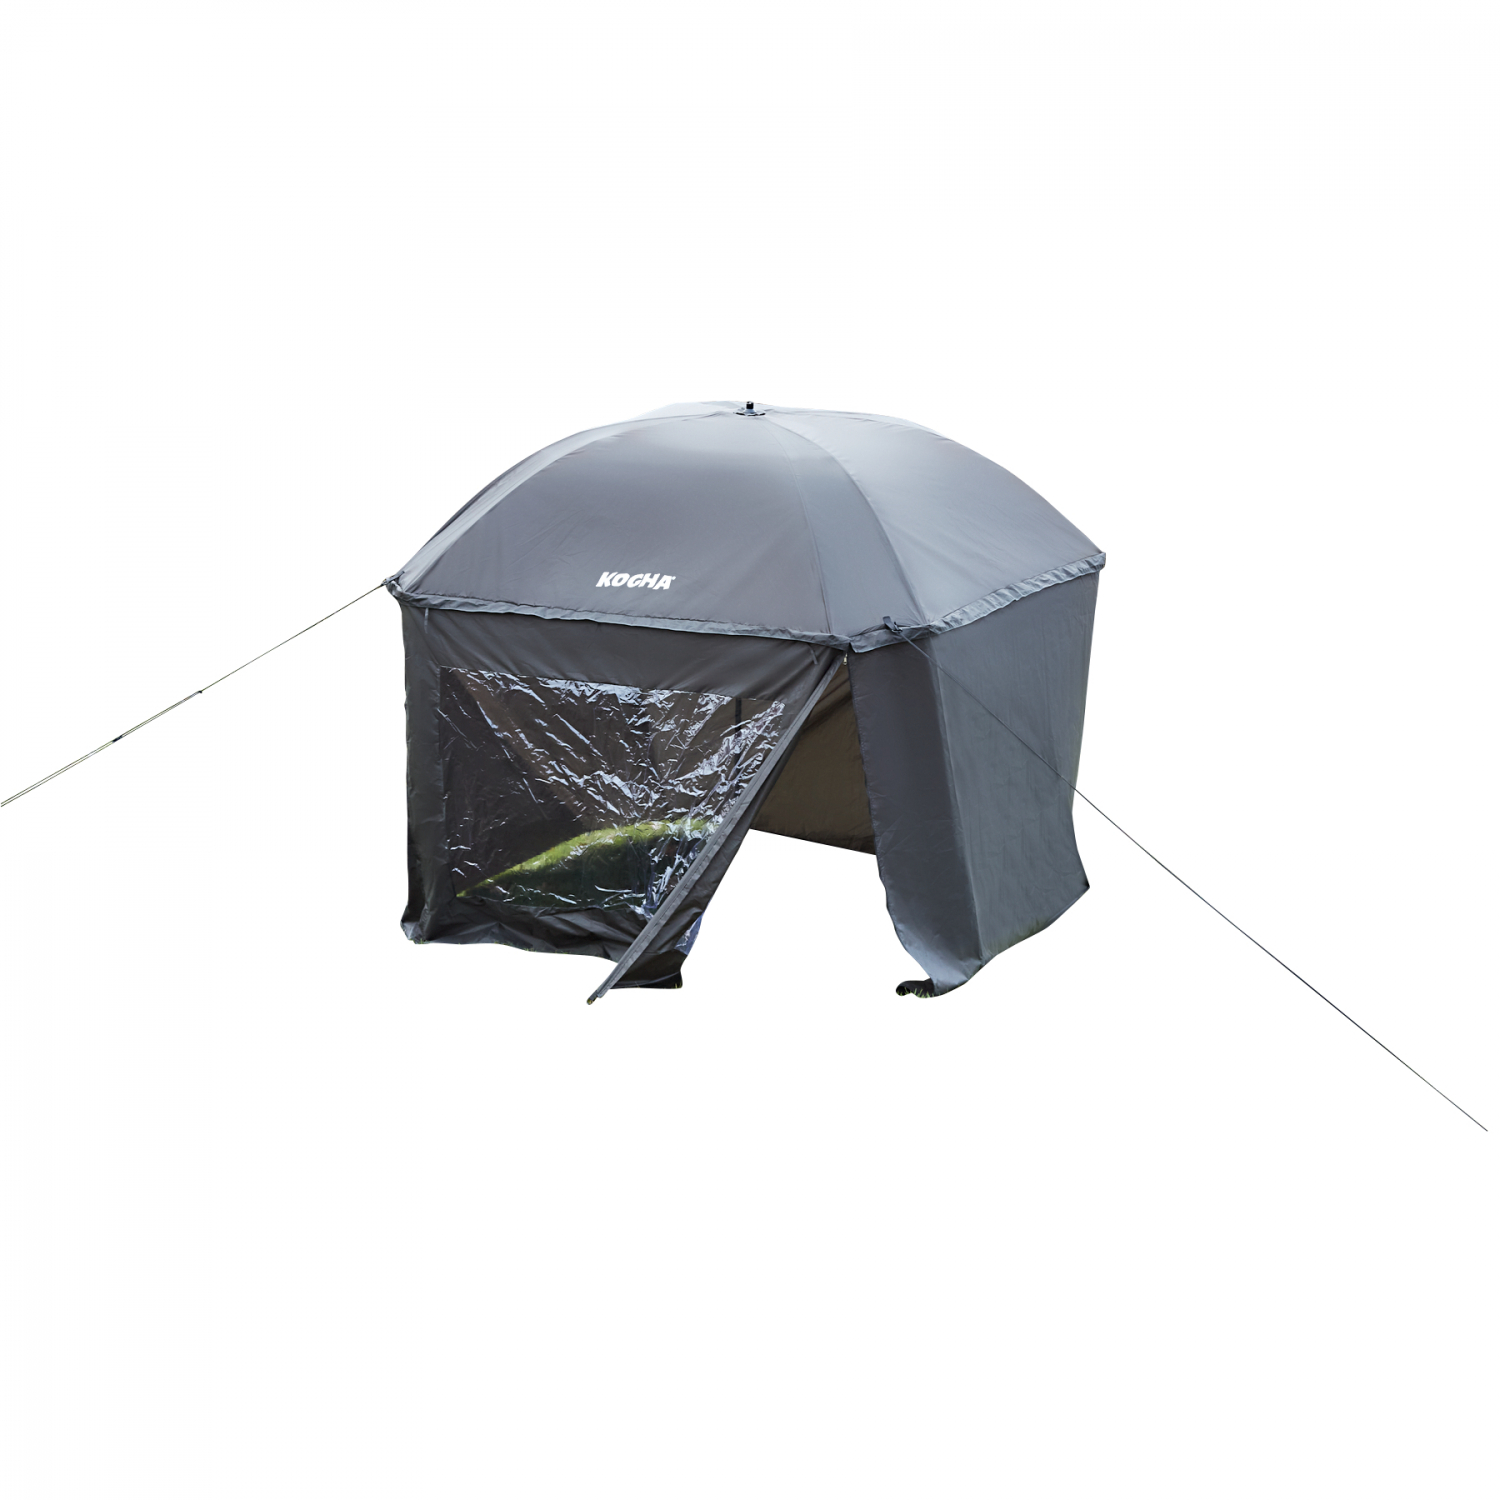 Kogha Two-Man Umbrella Tent Full Cover DLX at low prices